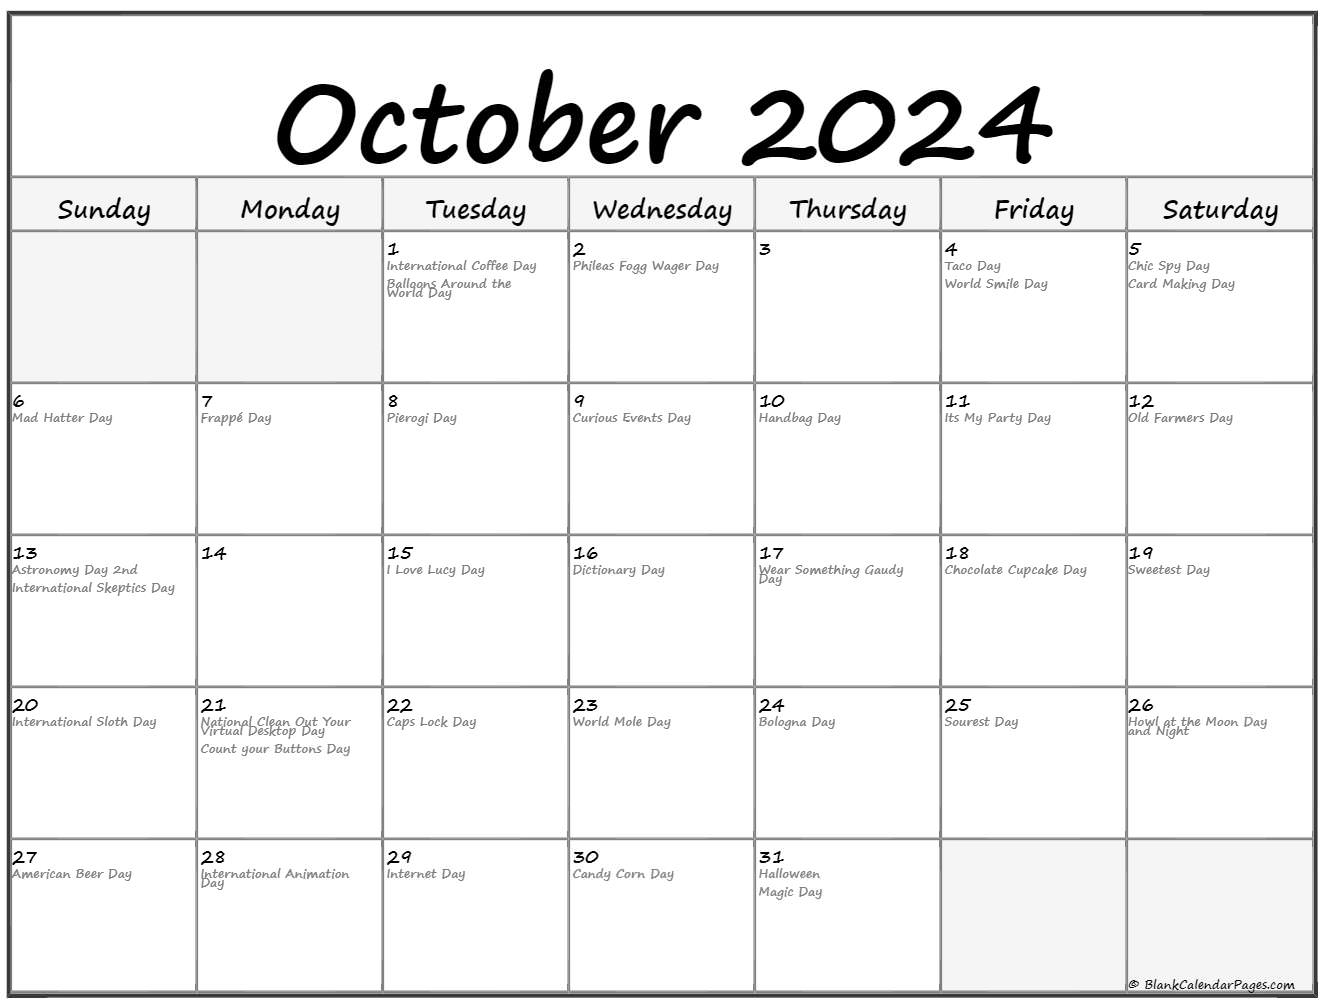 Collection Of October 2020 Calendars With Holidays